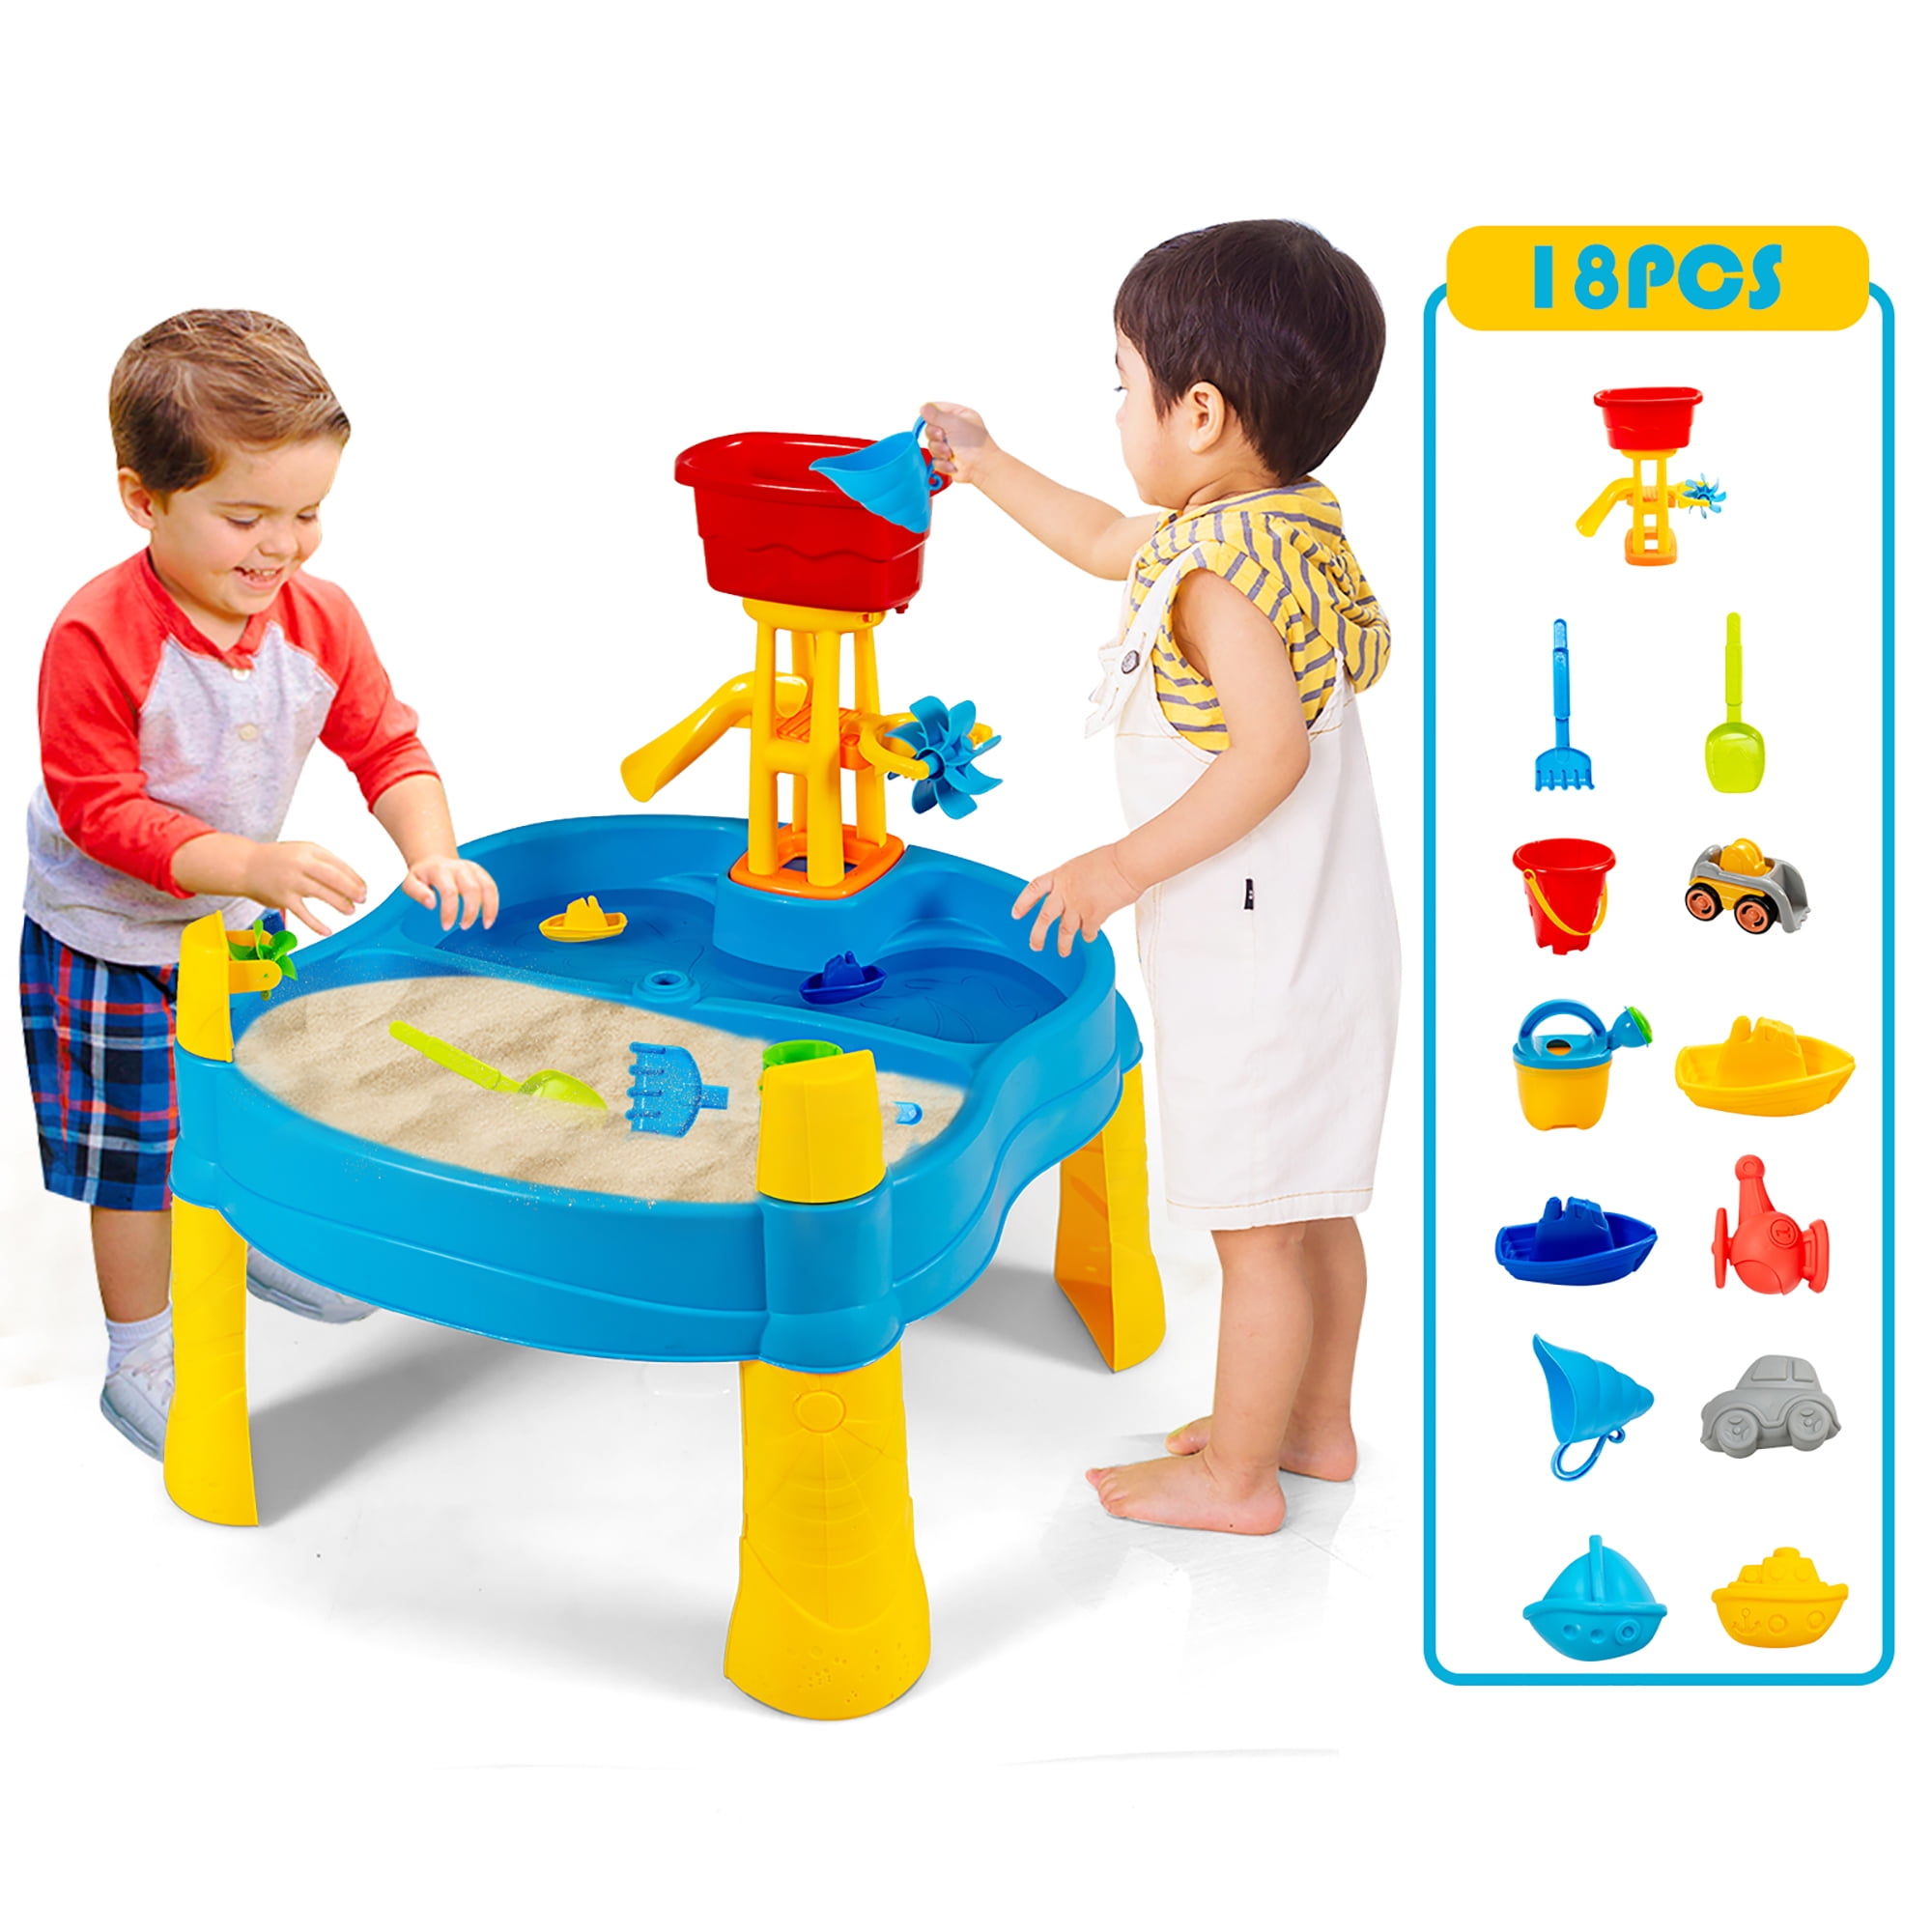 Kids Childrens Sand and Water Table Boys Girls Sandpit Outdoor Garden Play Set 